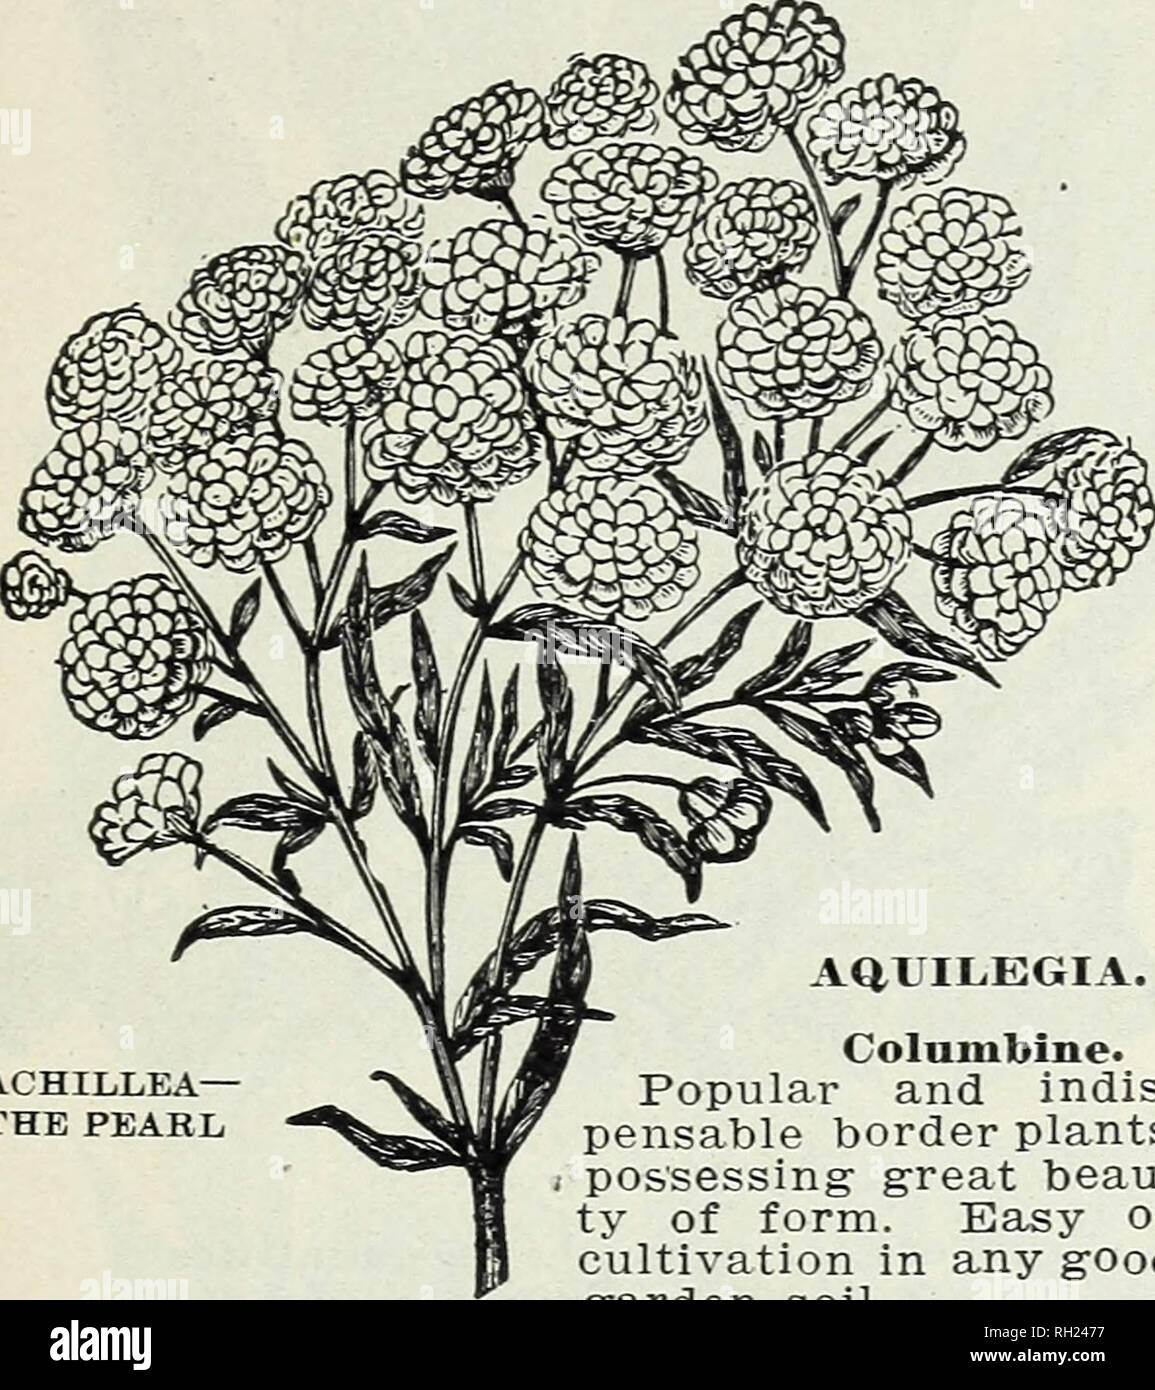 . Bulbs and plants : autumn 1904. Flowers Seeds Catalogs; Bulbs (Plants) Seeds Catalogs; Vegetables Seeds Catalogs; Nurseries (Horticulture) Catalogs; Plants, Ornamental Catalogs; Gardening Equipment and supplies Catalogs. FLOWERING BULBS. PLANTS, ETC. 23 ACHILLEA- THE PEARL HARDY HERBACEOUS PLANTS. Perennial border plants continue to command the attention and enjoy the pop- ularity they so richly deserve. In fact, the demand for them the past season far exceeded that of any previous year in our experience. Our stock embraces a carefullv selected assortment, each variety being the best of its  Stock Photo